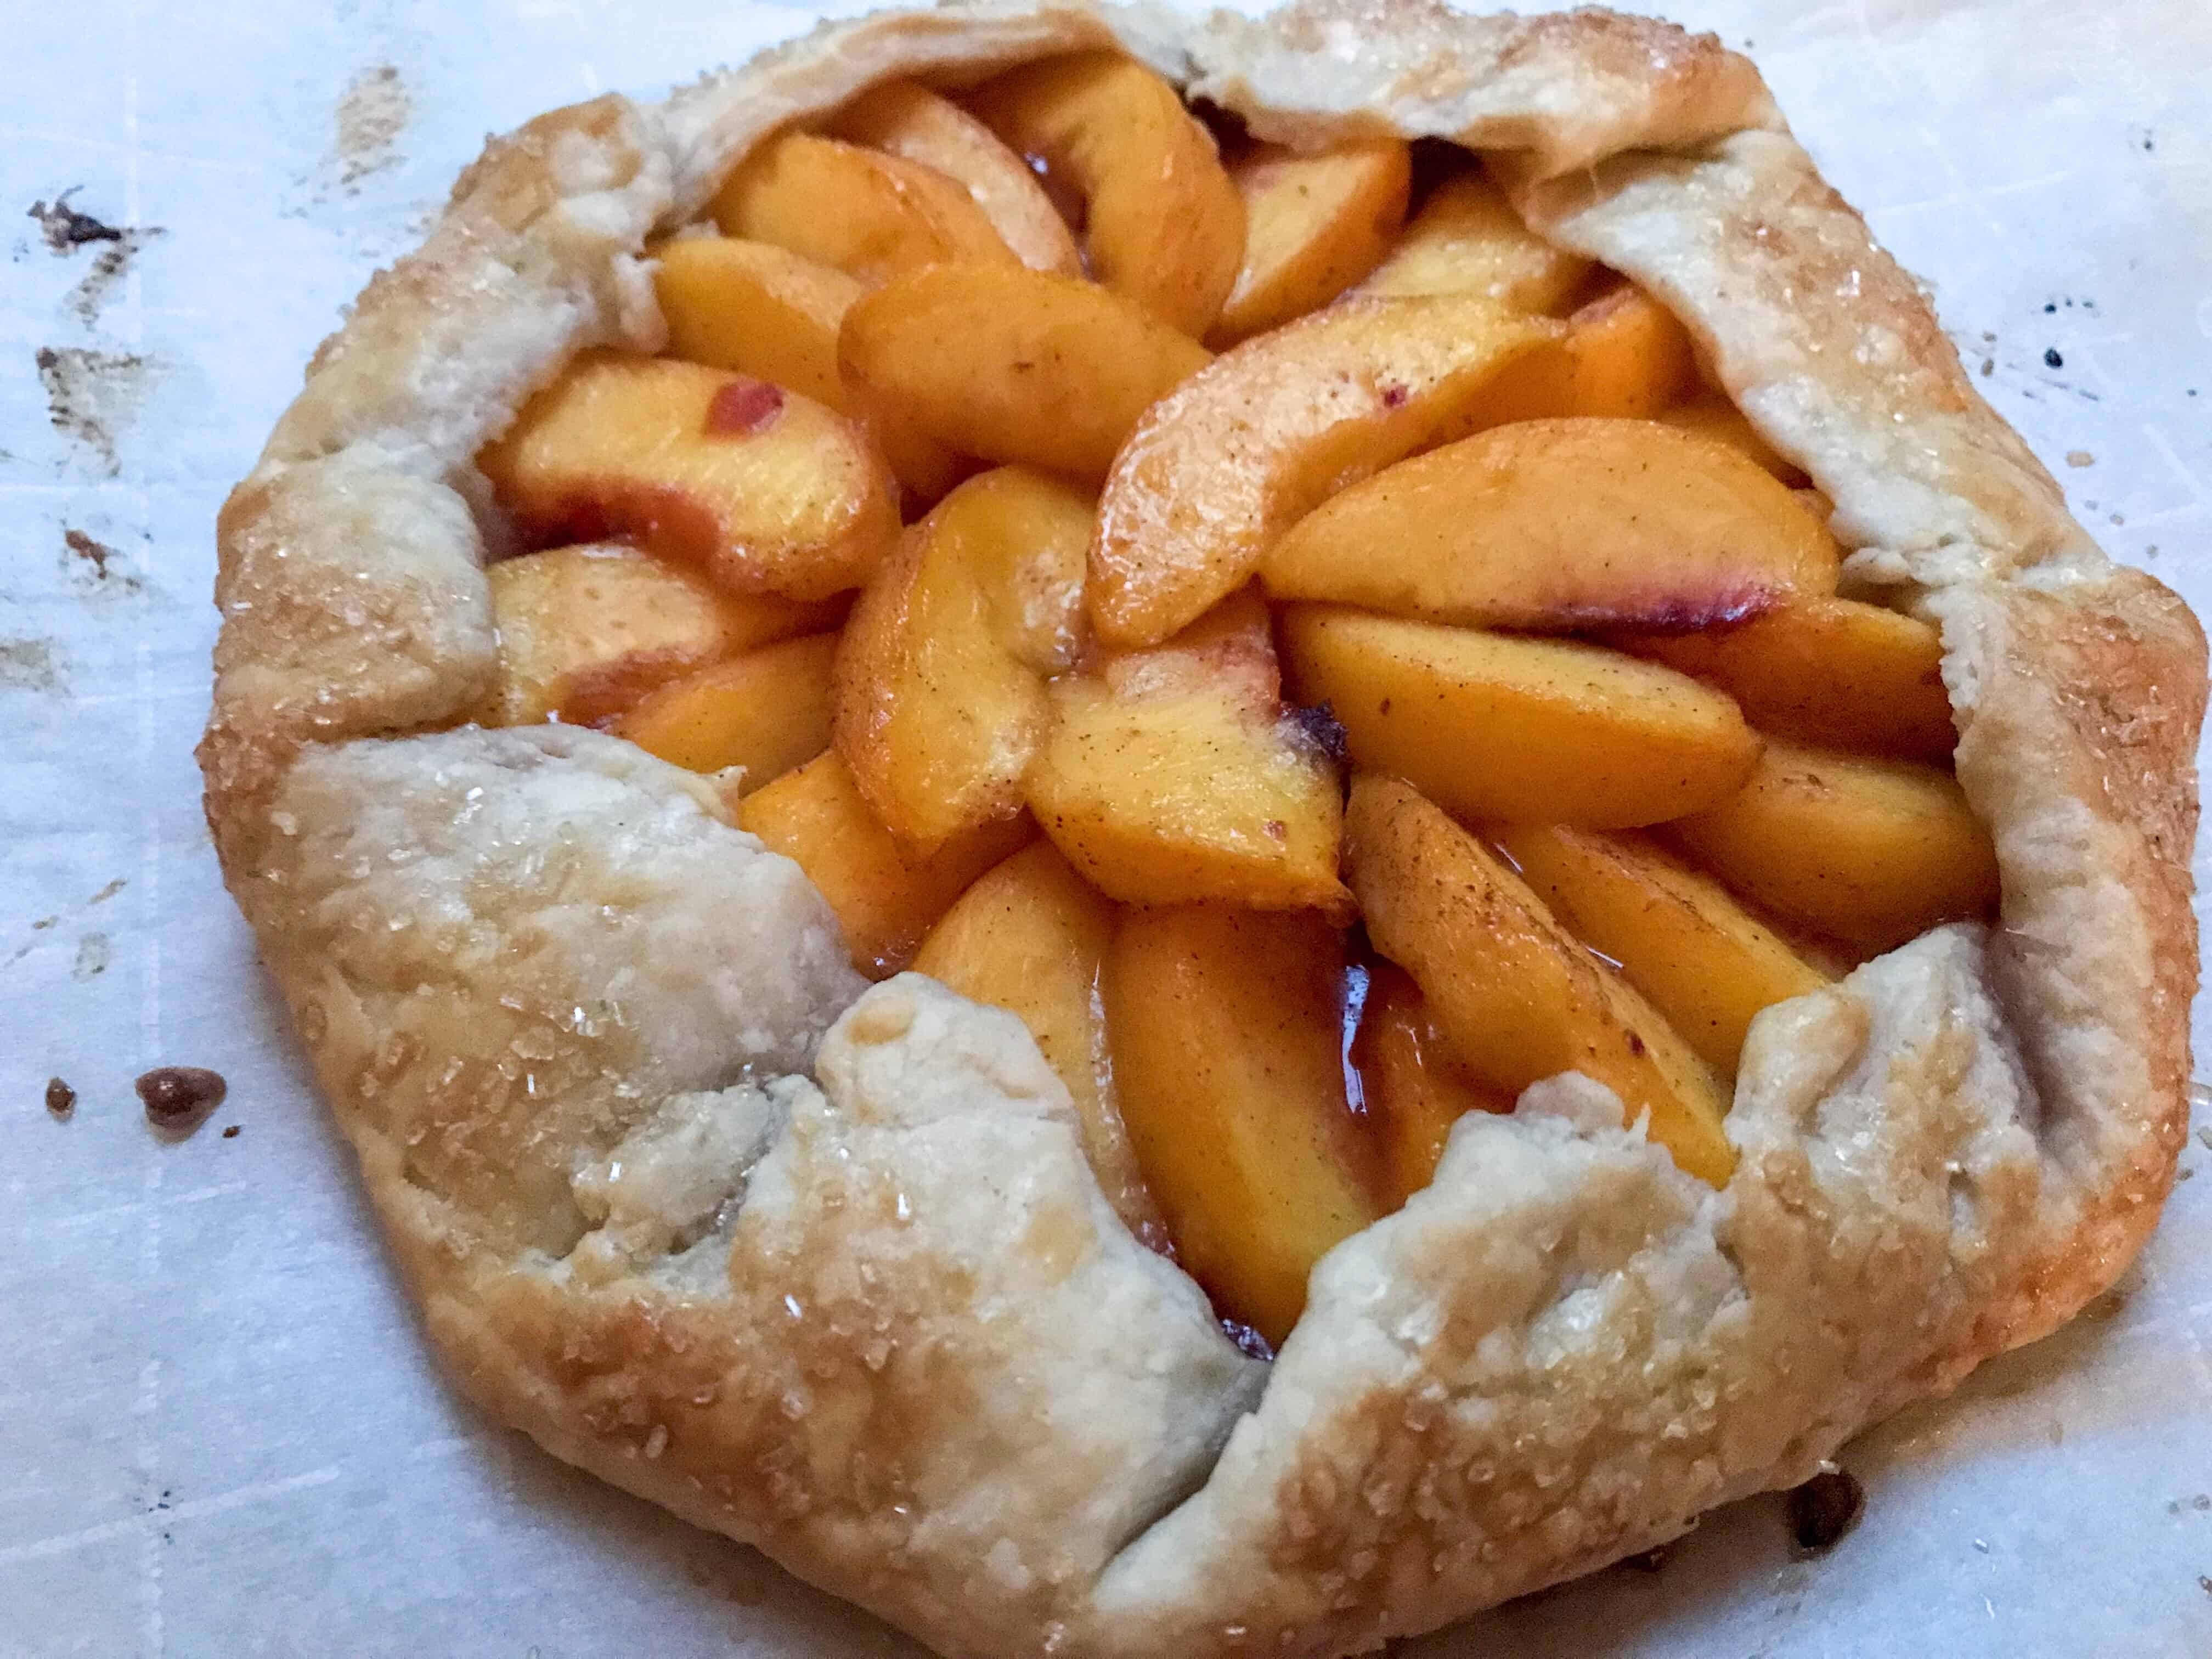 finished peach galette
